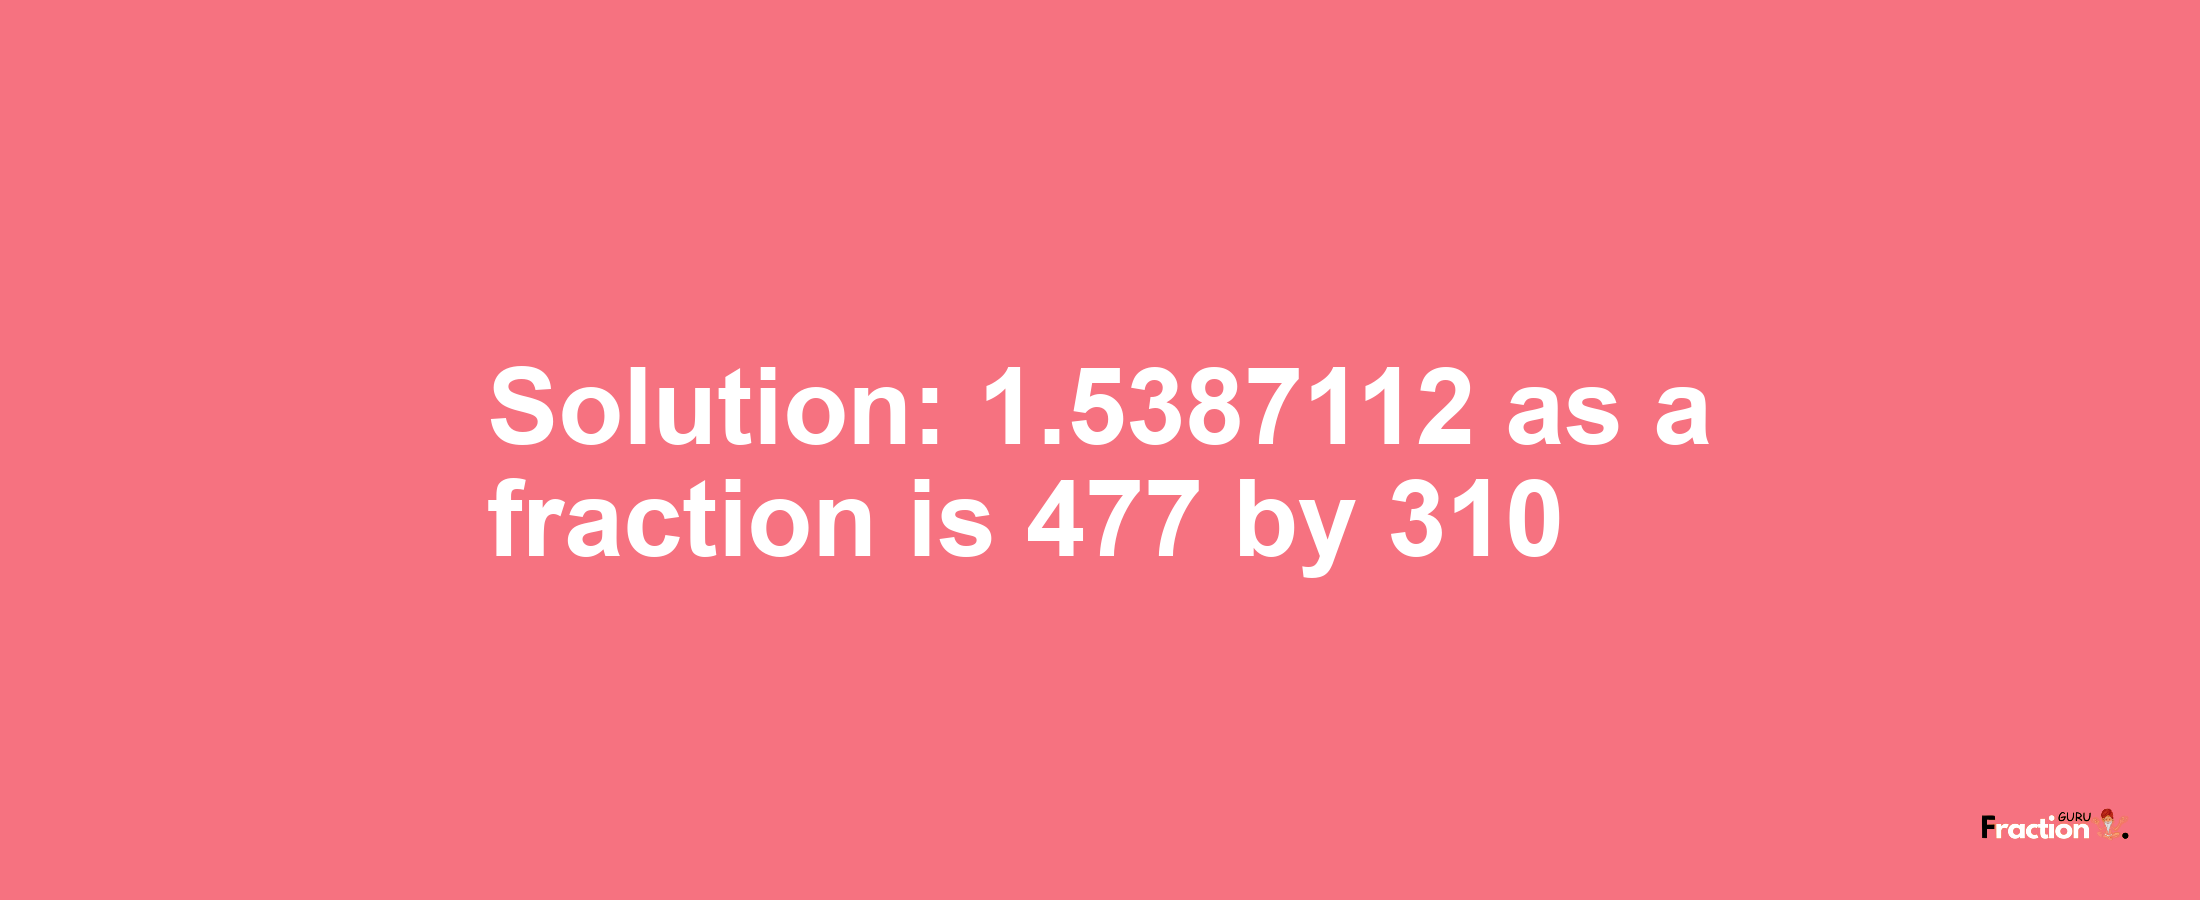 Solution:1.5387112 as a fraction is 477/310